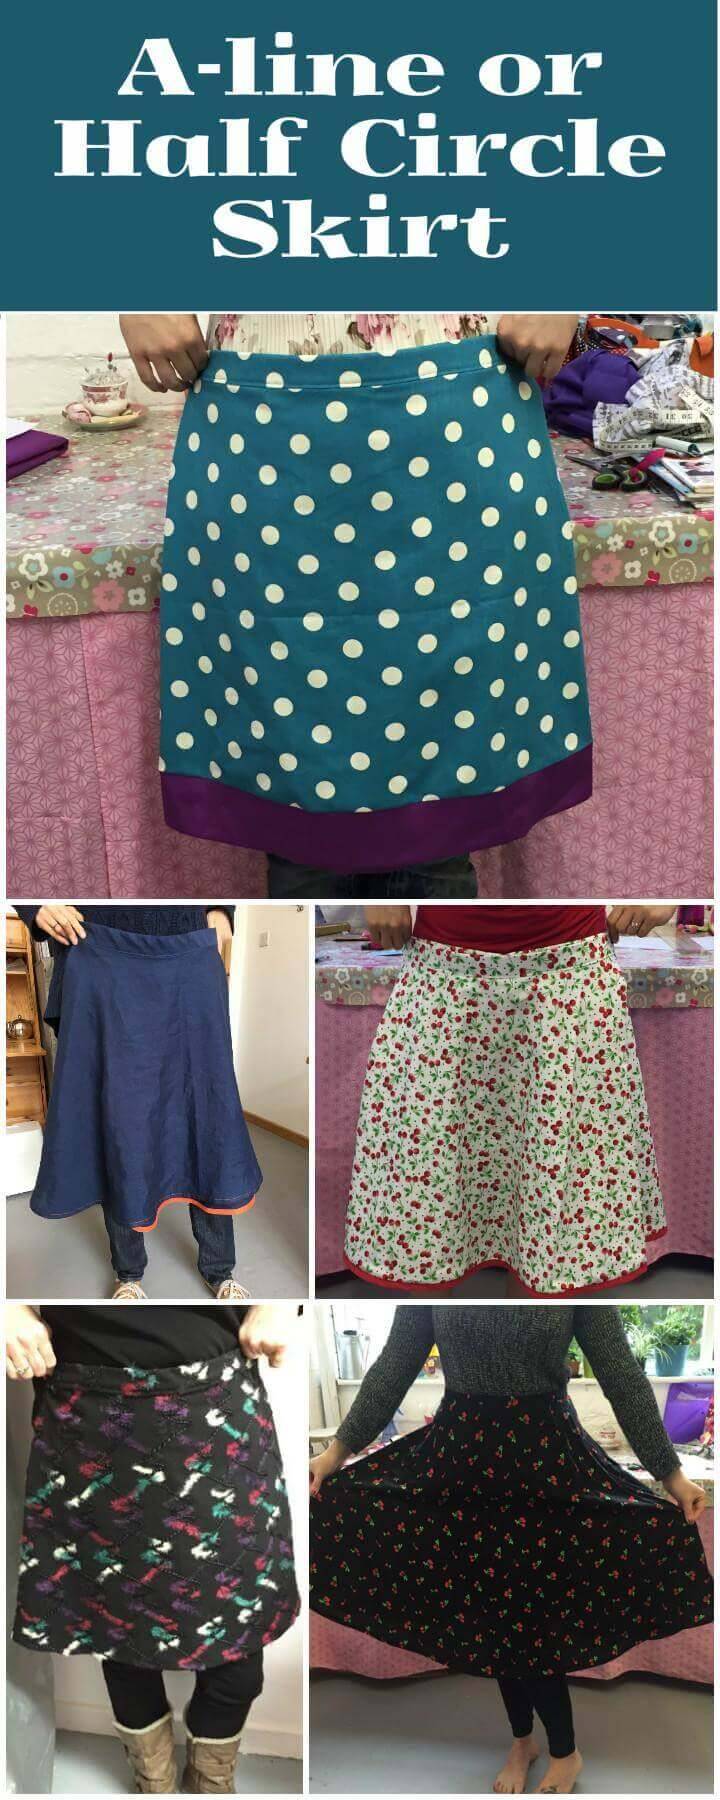 DIY a line or half circle skirt project